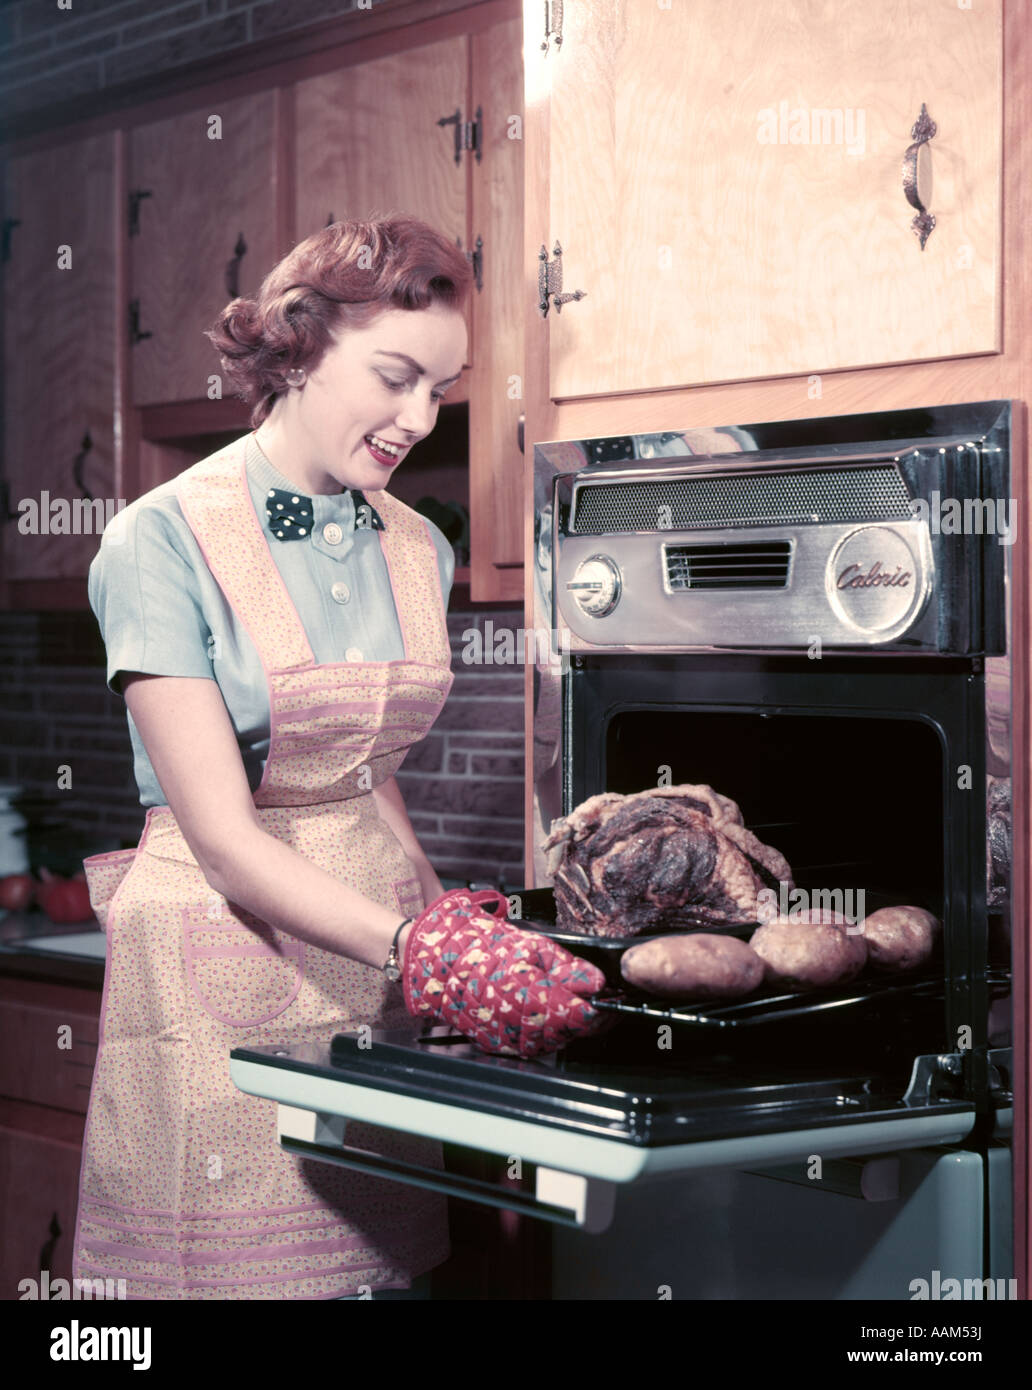 https://c8.alamy.com/comp/AAM53J/1950s-smiling-woman-housewife-wearing-apron-and-oven-mitts-taking-AAM53J.jpg